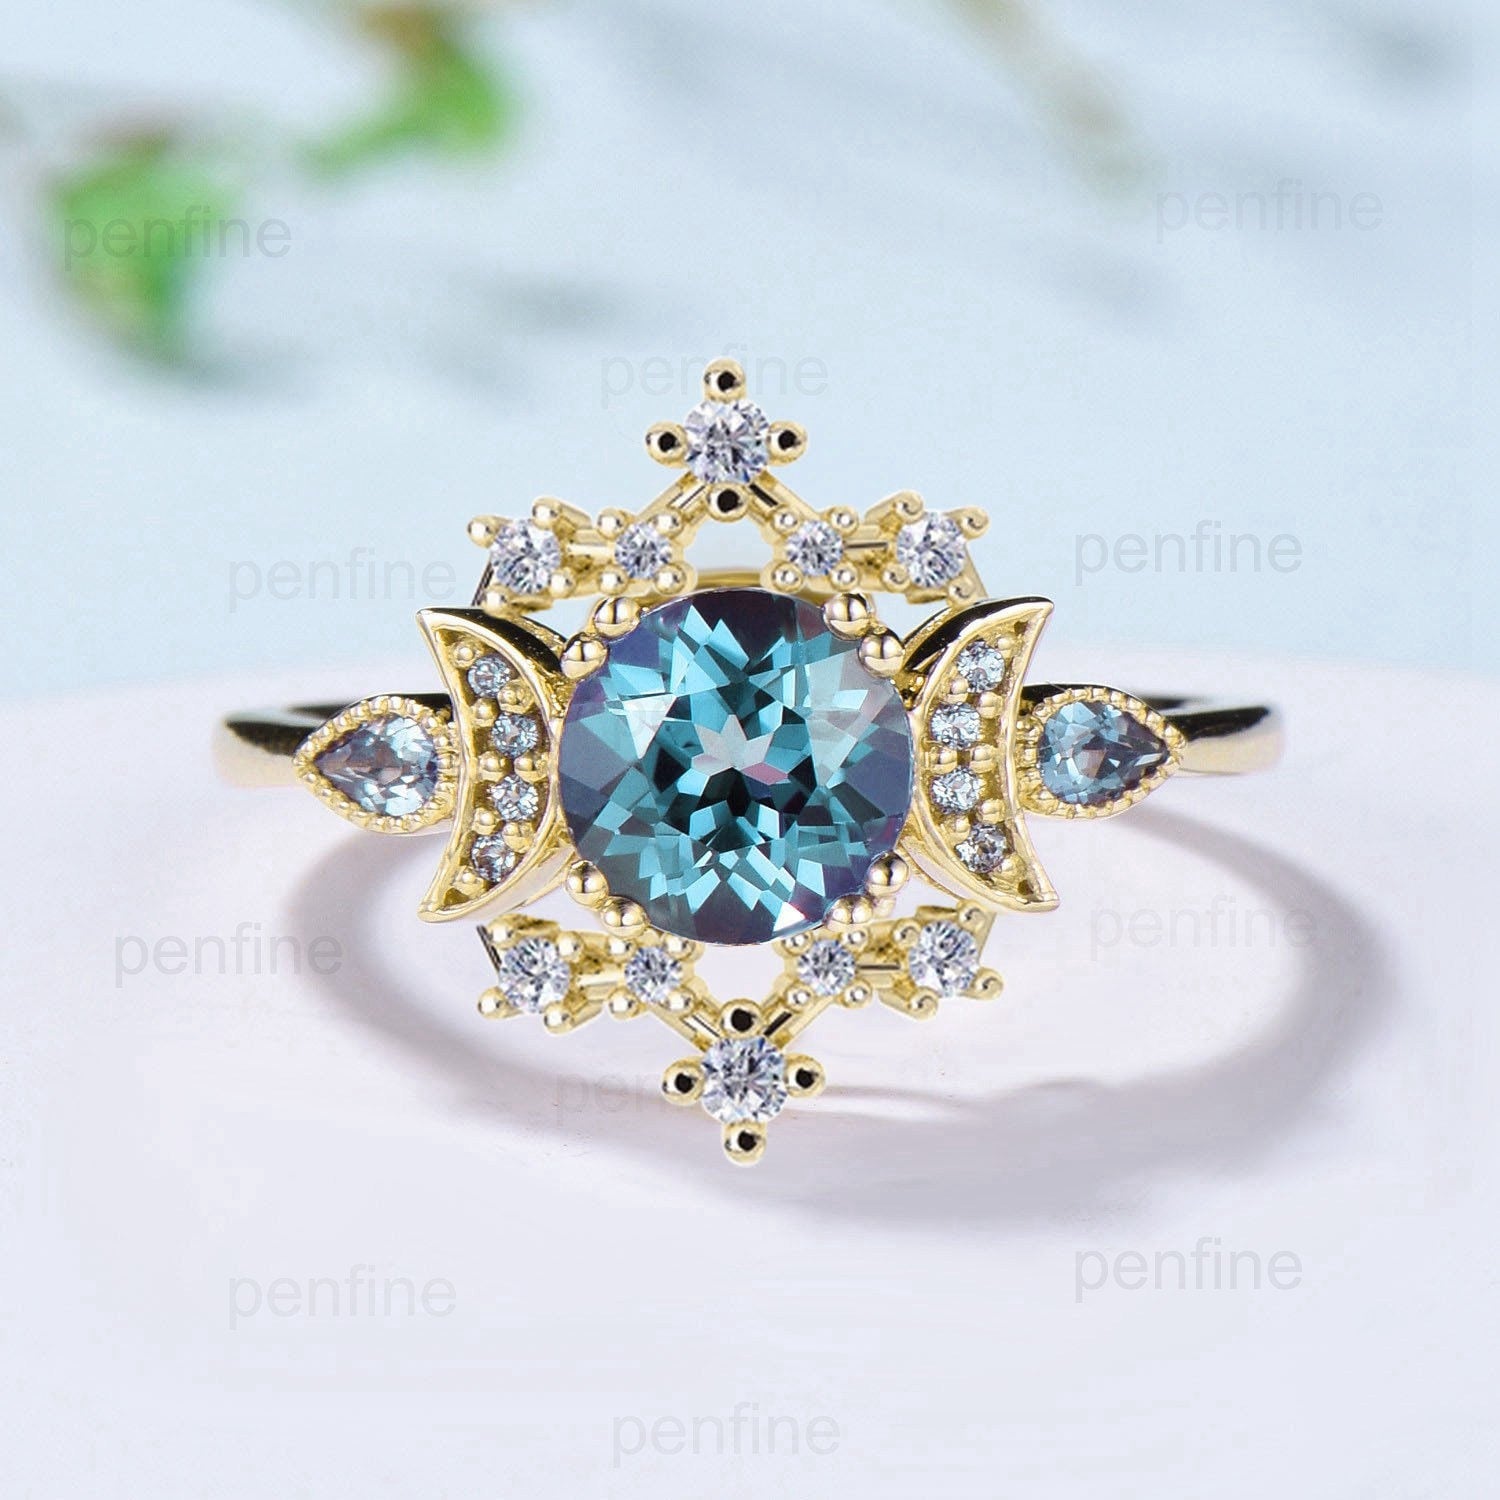 Unique Alexandrite Engagement Ring Fancy Crescent Moon Color Change Wedding Ring Women Galaxy Star Art Deco Anniversary Ring Gift for Women - PENFINE